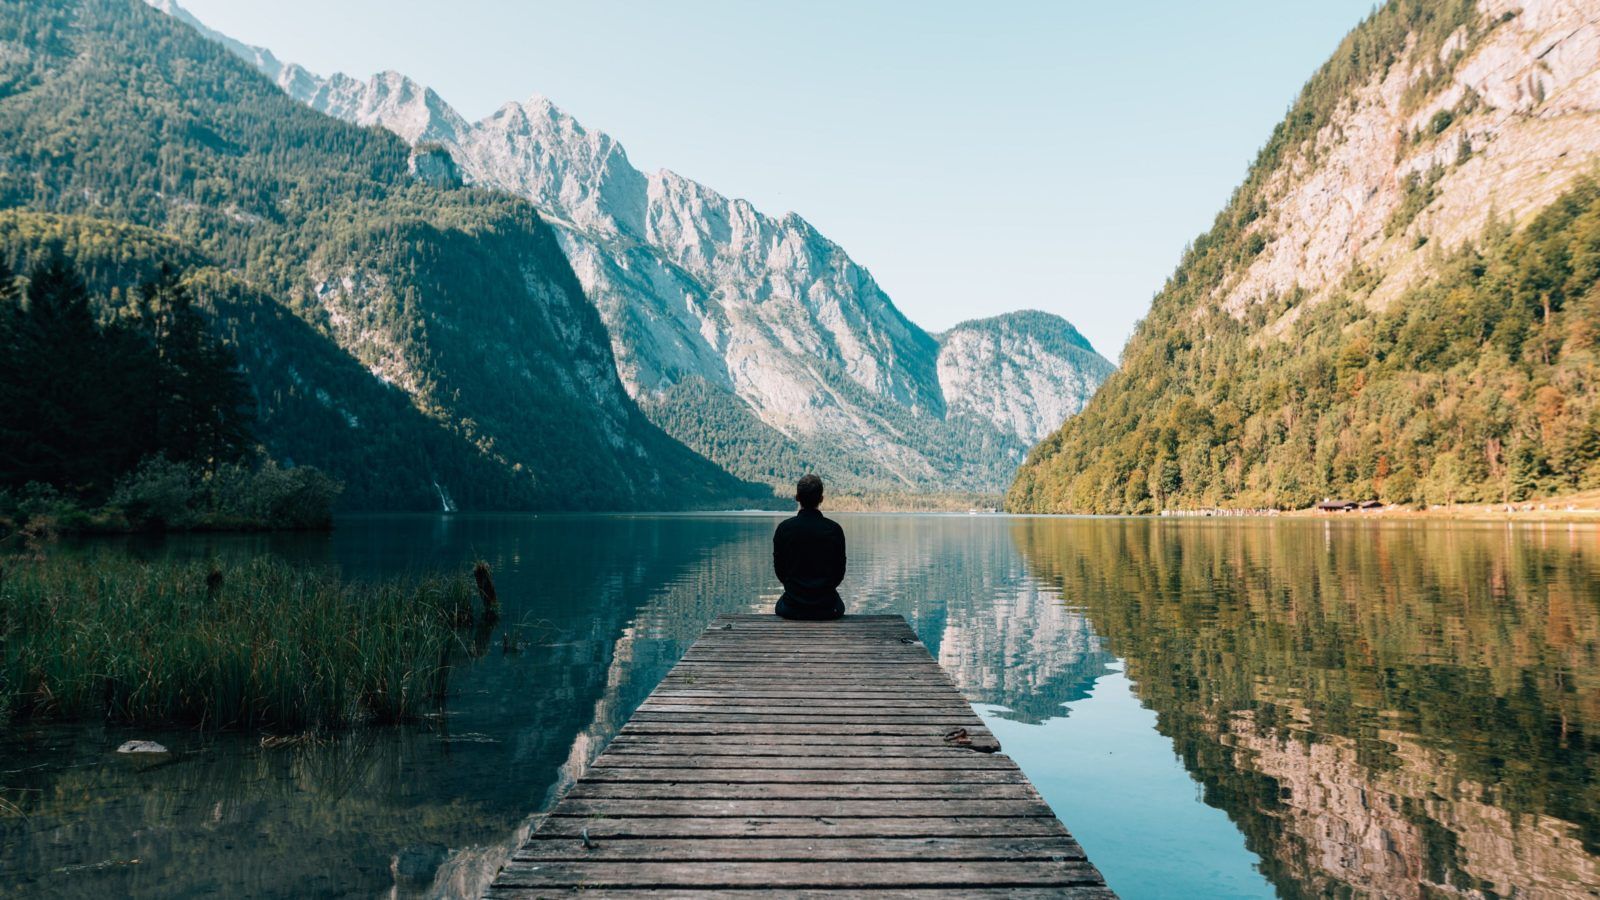 Keep calm and mindful with these meditation apps